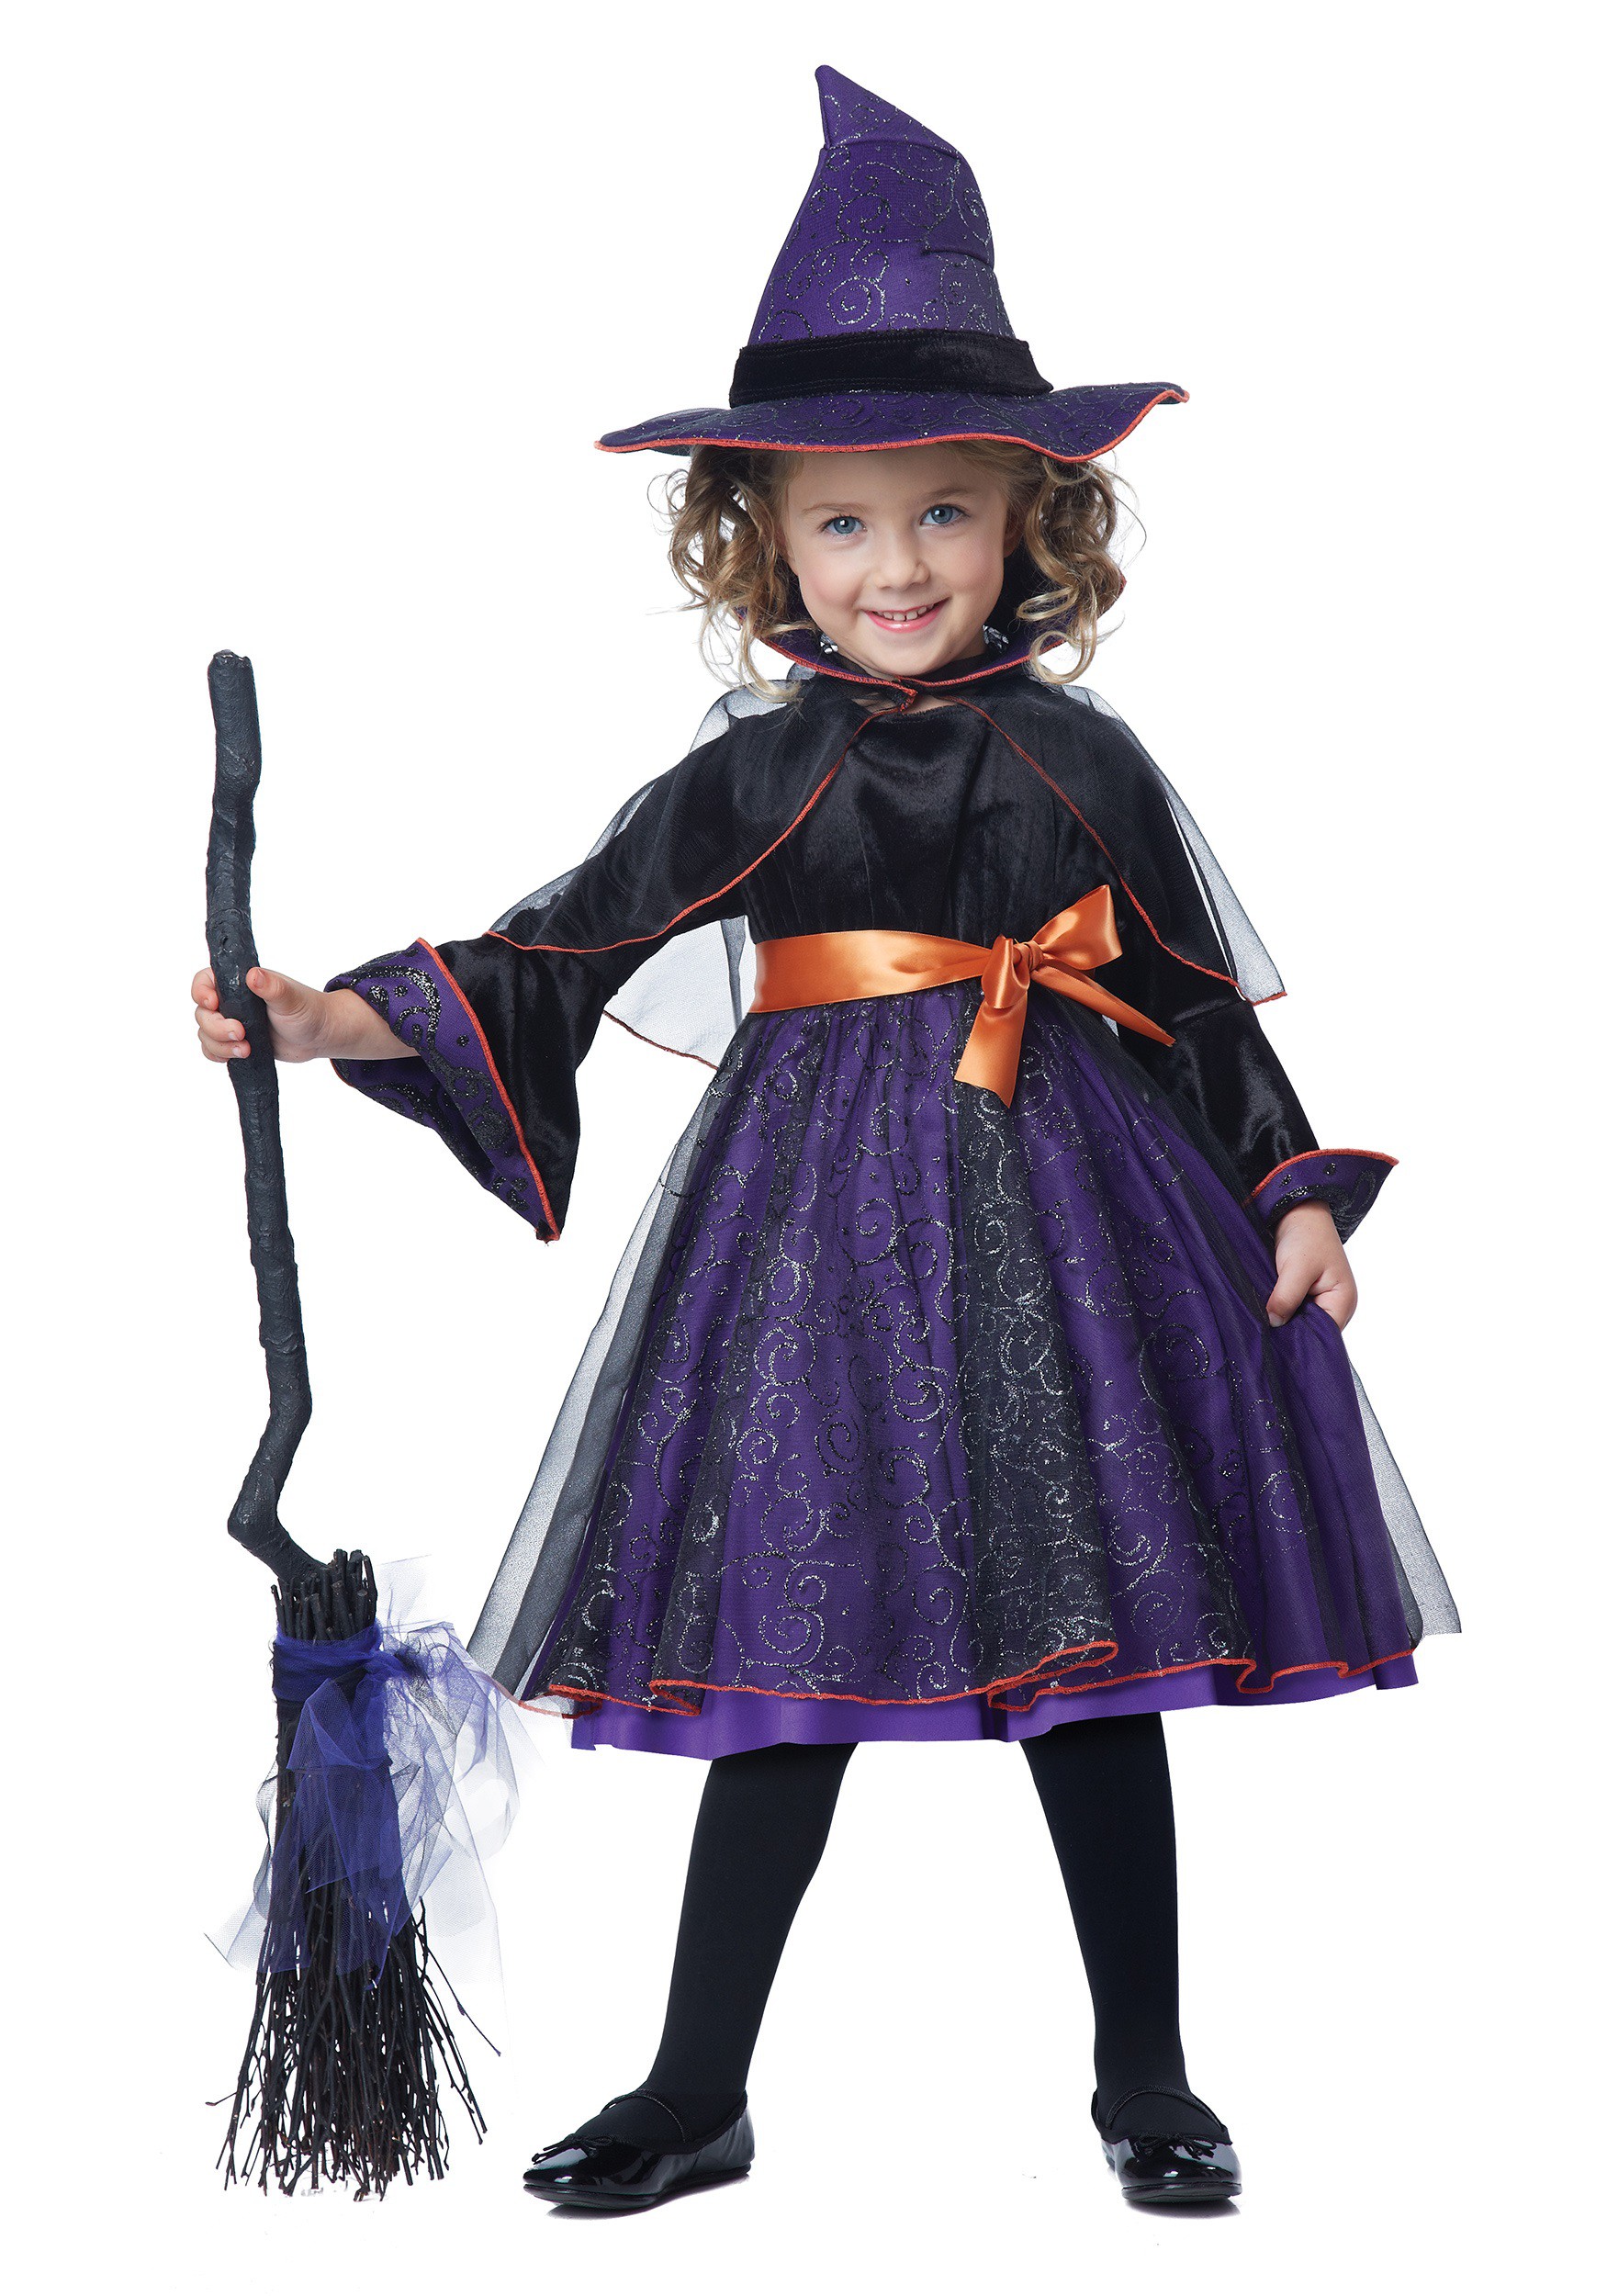 Photos - Fancy Dress California Costume Collection Toddler Hocus Pocus Witch Costume for Girls 